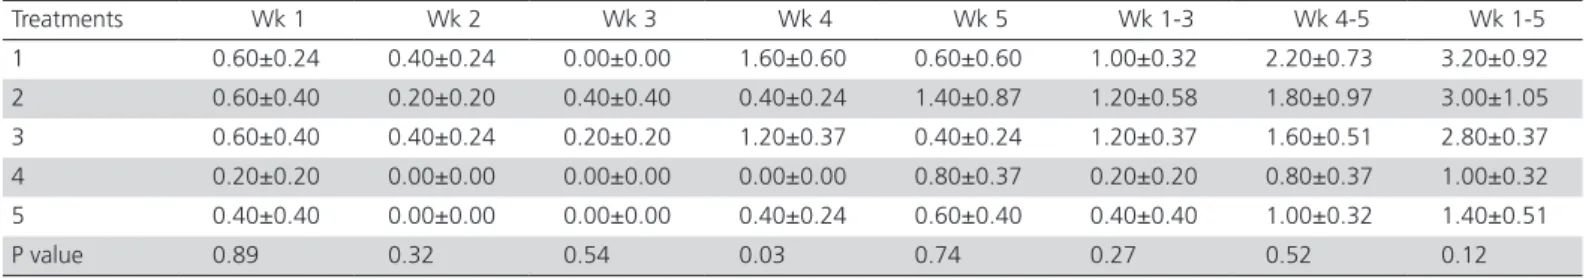 Table 6 – Effect of digestible lysine on the mortality (%) of broiler chickens reared under subtropical summer conditions  between d 1-35 (Mean±SEM) Treatments Wk 1 Wk 2 Wk 3 Wk 4 Wk 5 Wk 1-3 Wk 4-5 Wk 1-5 1 0.60±0.24 0.40±0.24 0.00±0.00 1.60±0.60 0.60±0.6